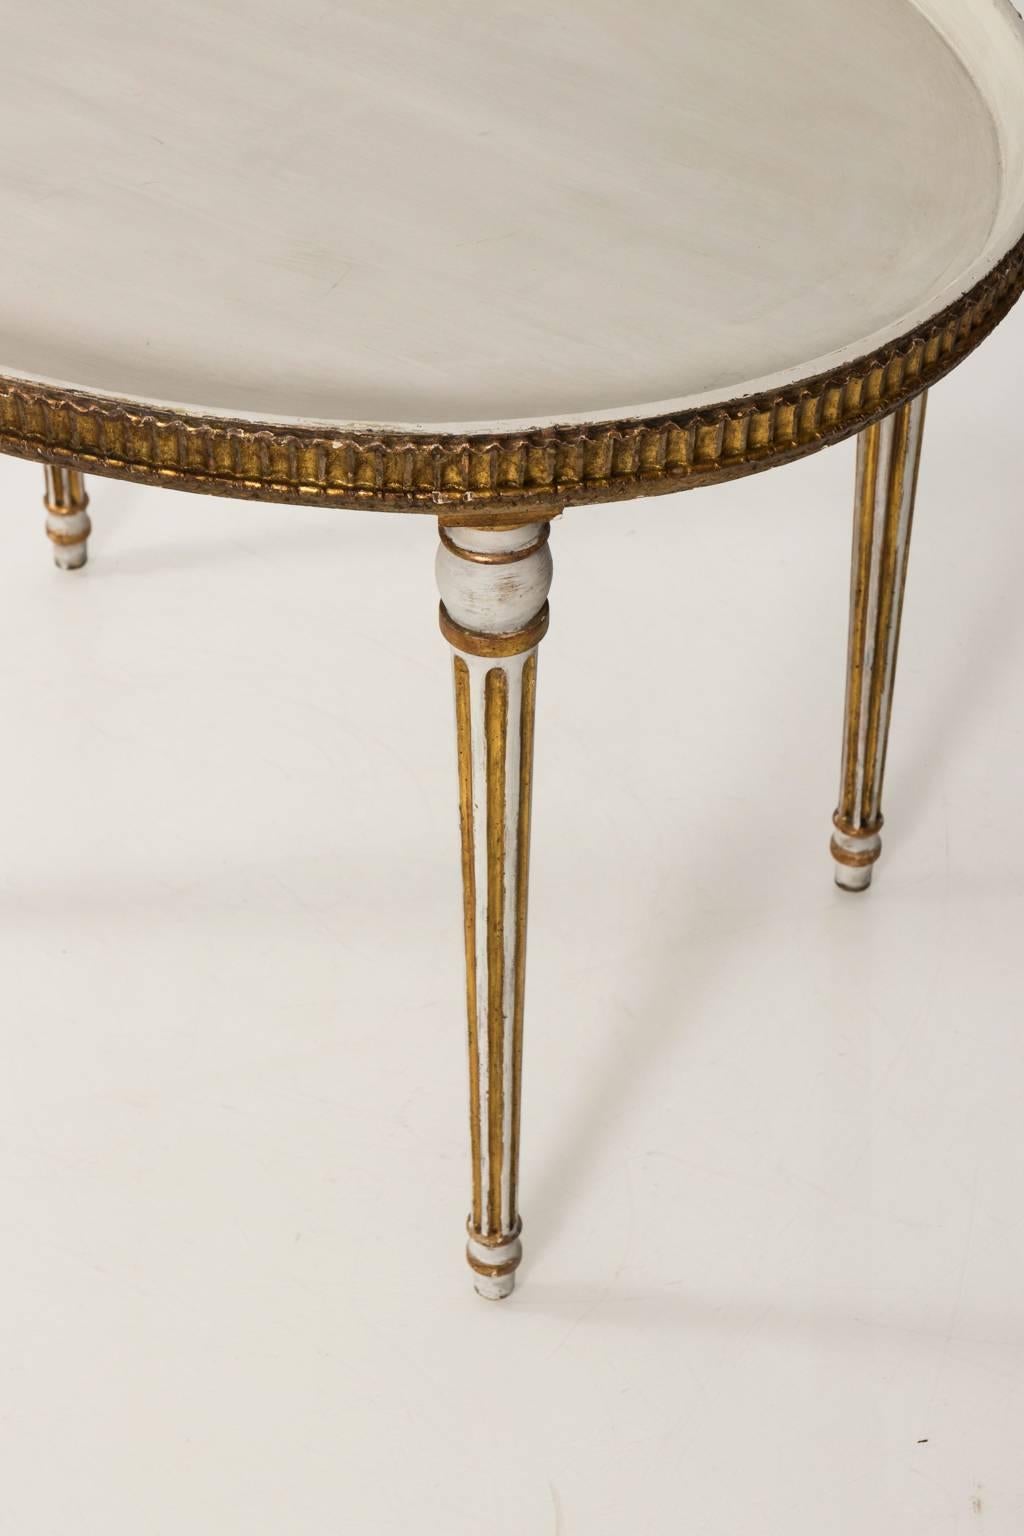 Late 19th Century 19th Century Neoclassical Oval Center Table